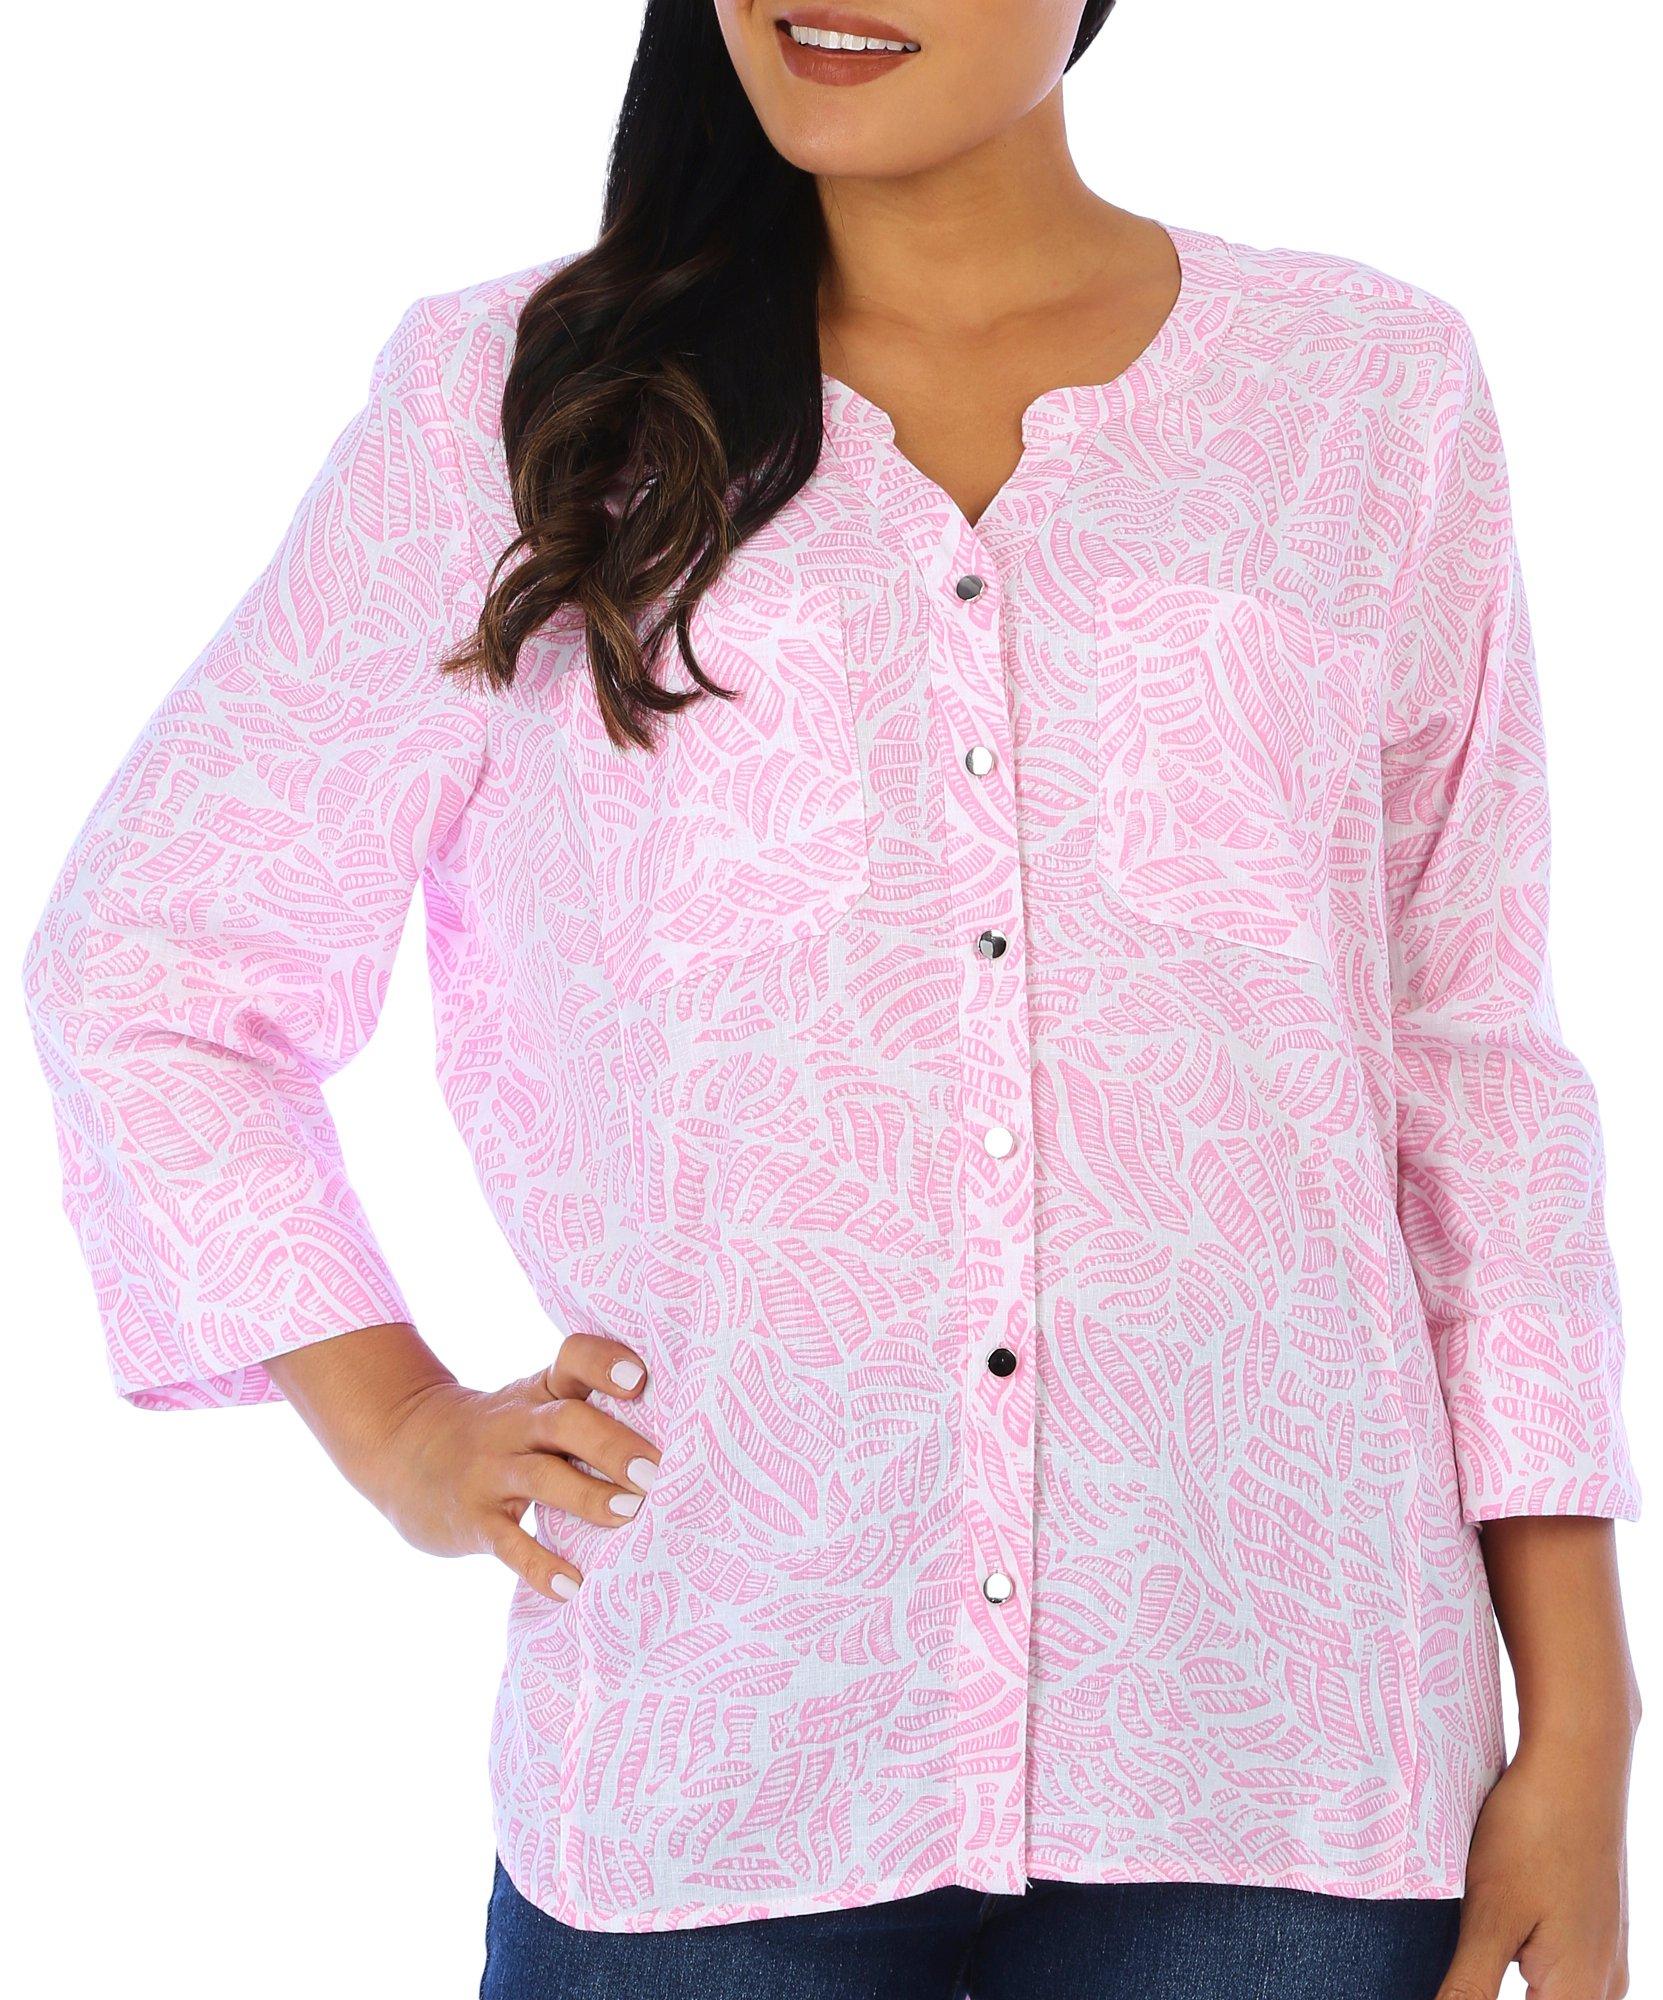 Coral Bay Womens Print Pattern Buttoned 3/4 Sleeve